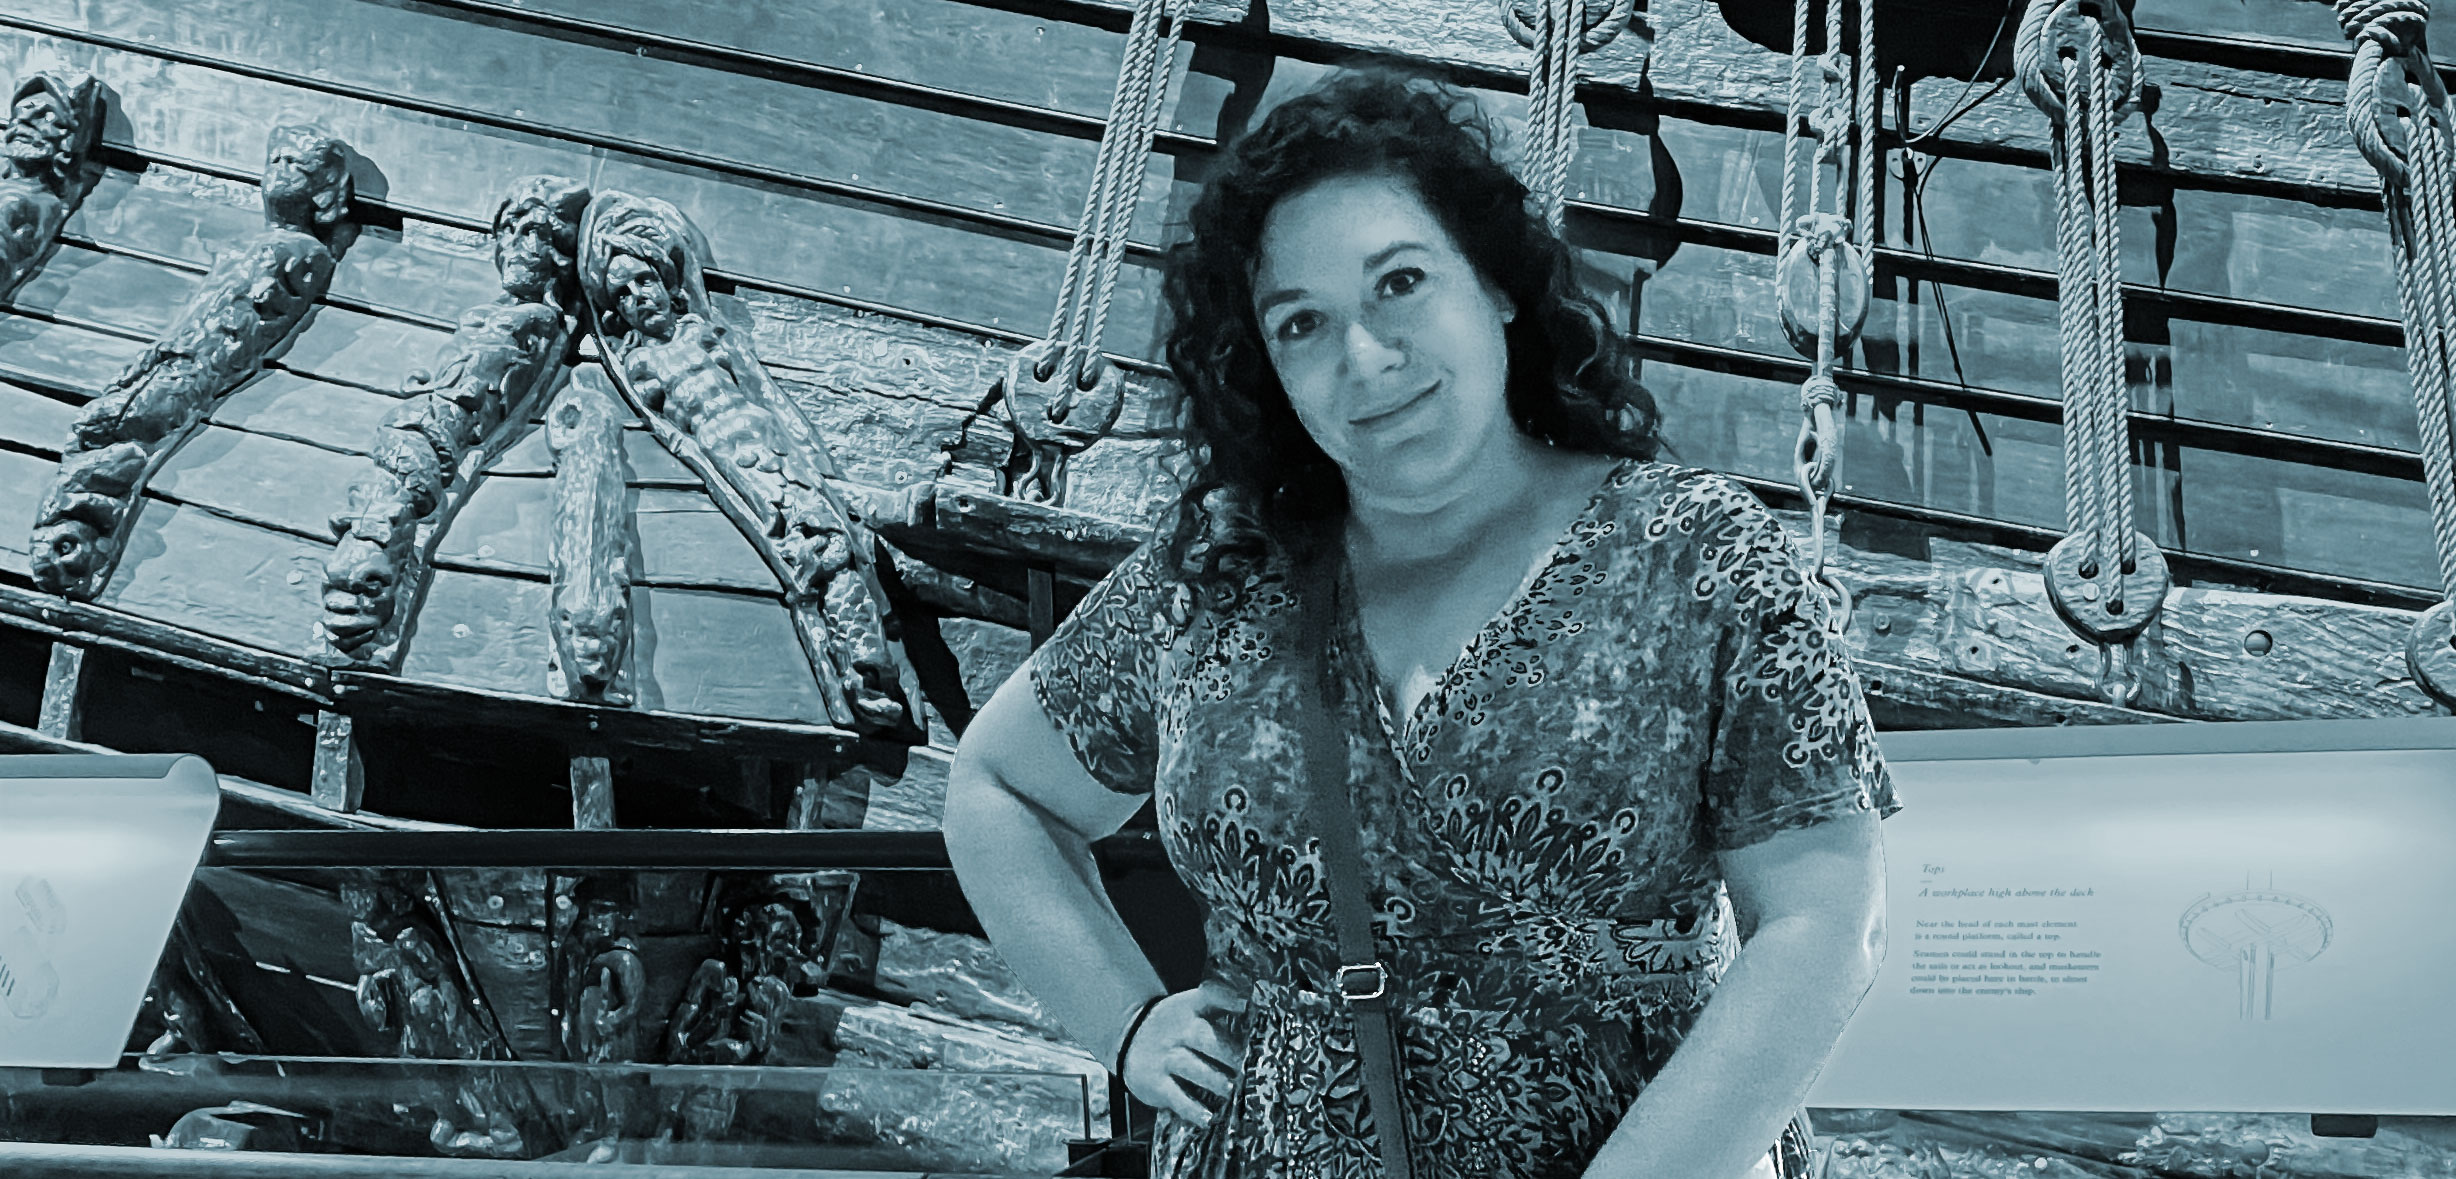 Rebecca Simon in front of a pirate ship exhibit at a museum